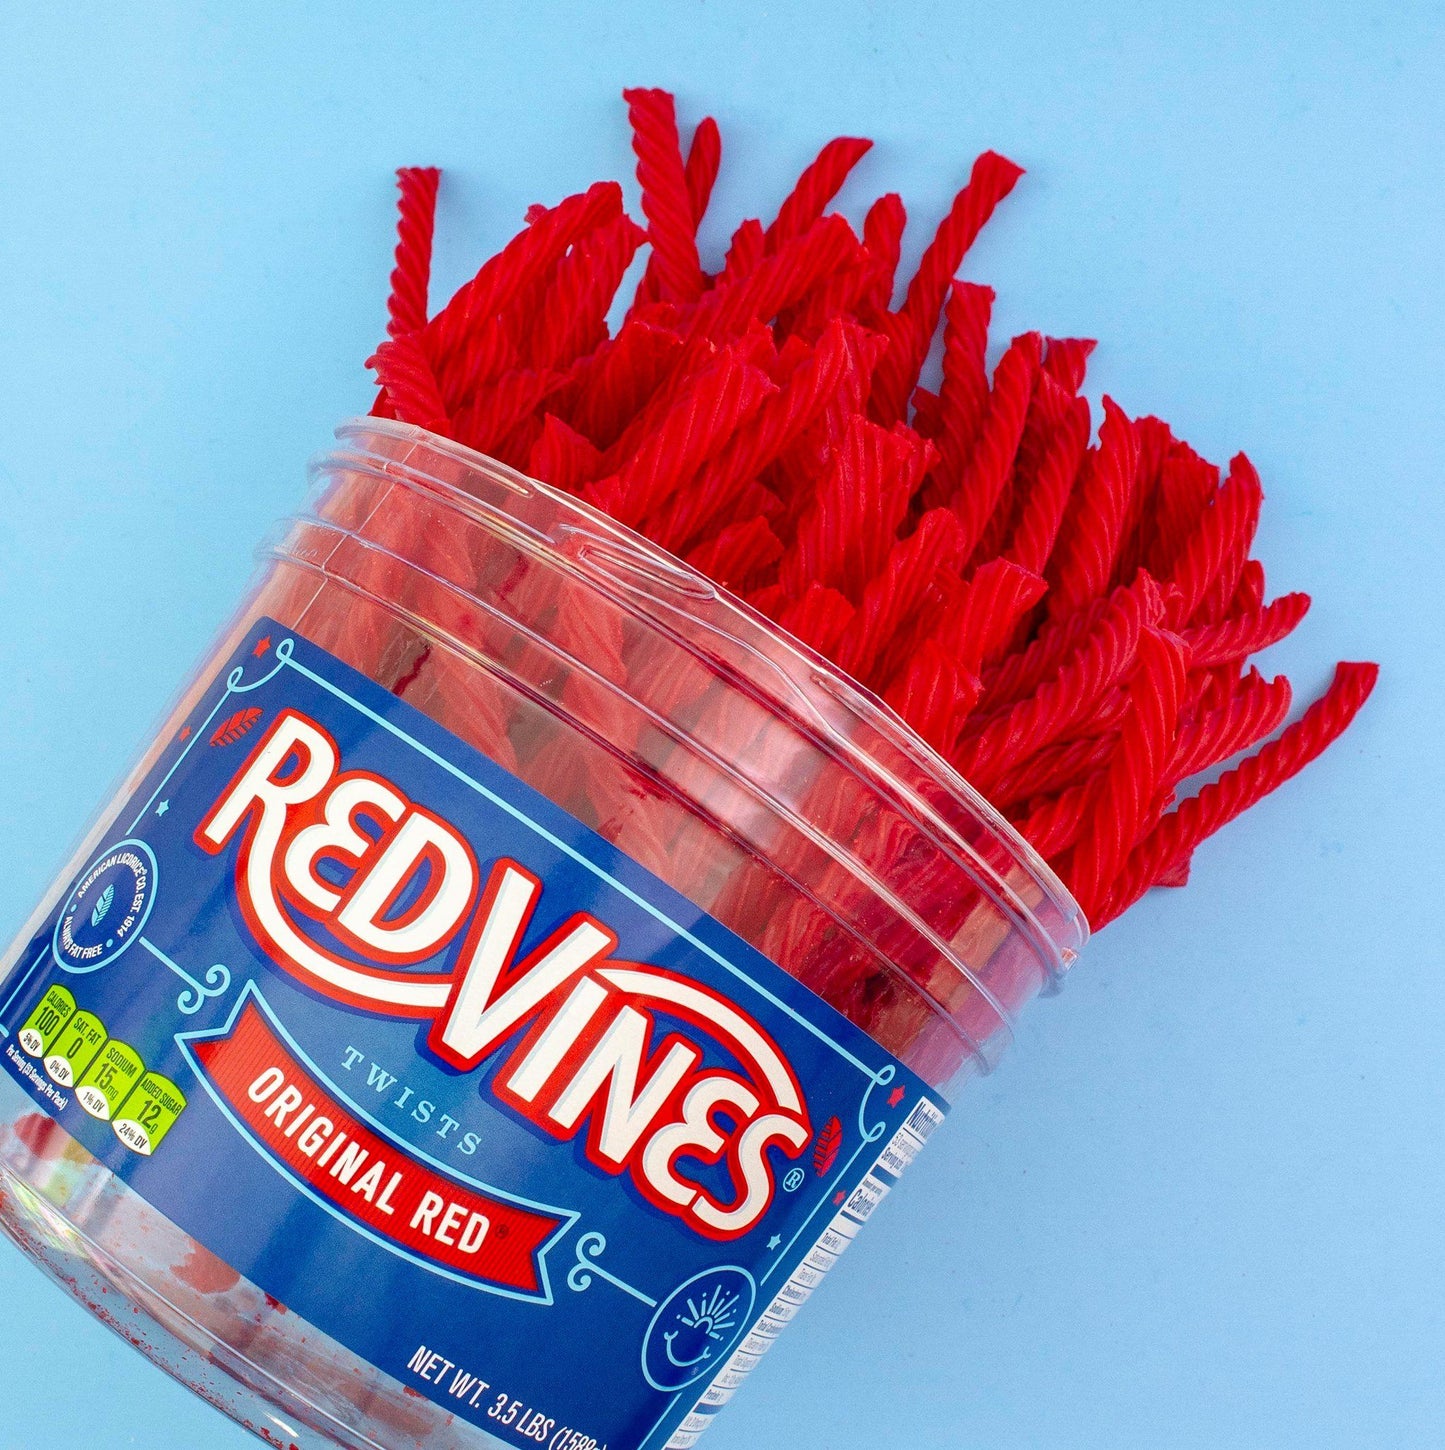 Red Vines Original Red Licorice Twists 3.5lb Jar with candy falling out